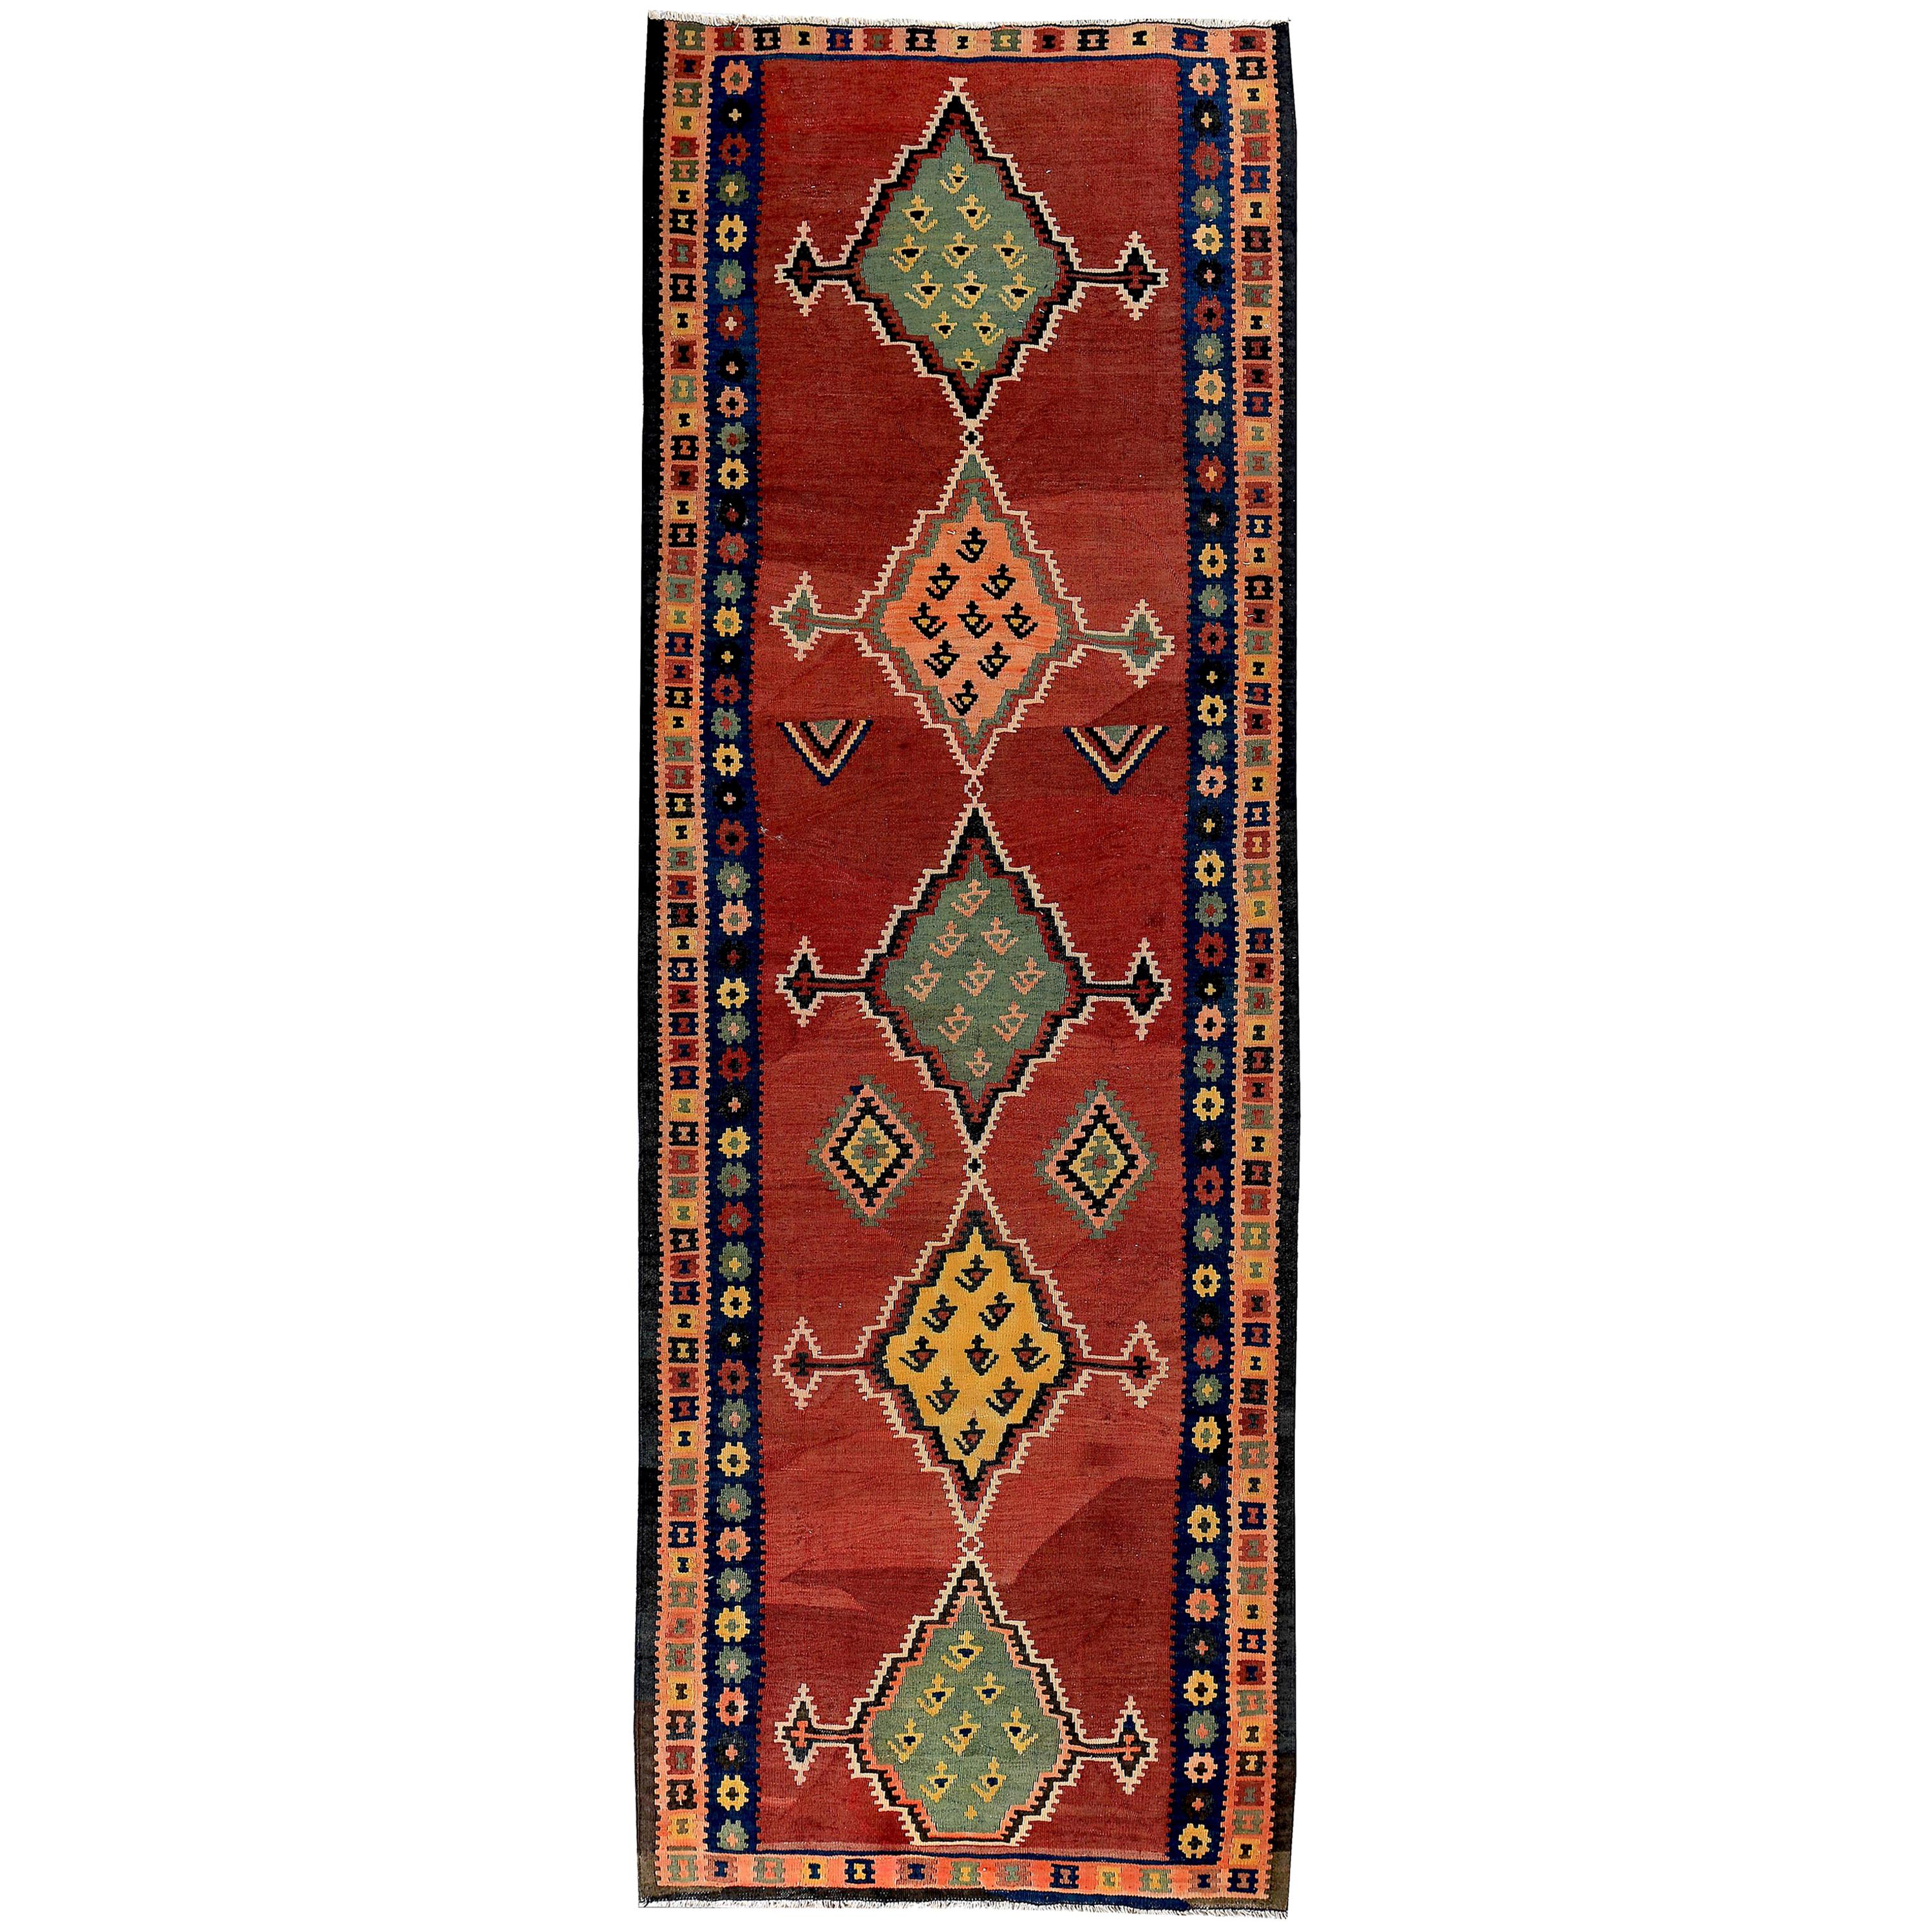 Turkish Kilim Runner Rug with Green and Yellow Tribal Medallions on Red Field For Sale